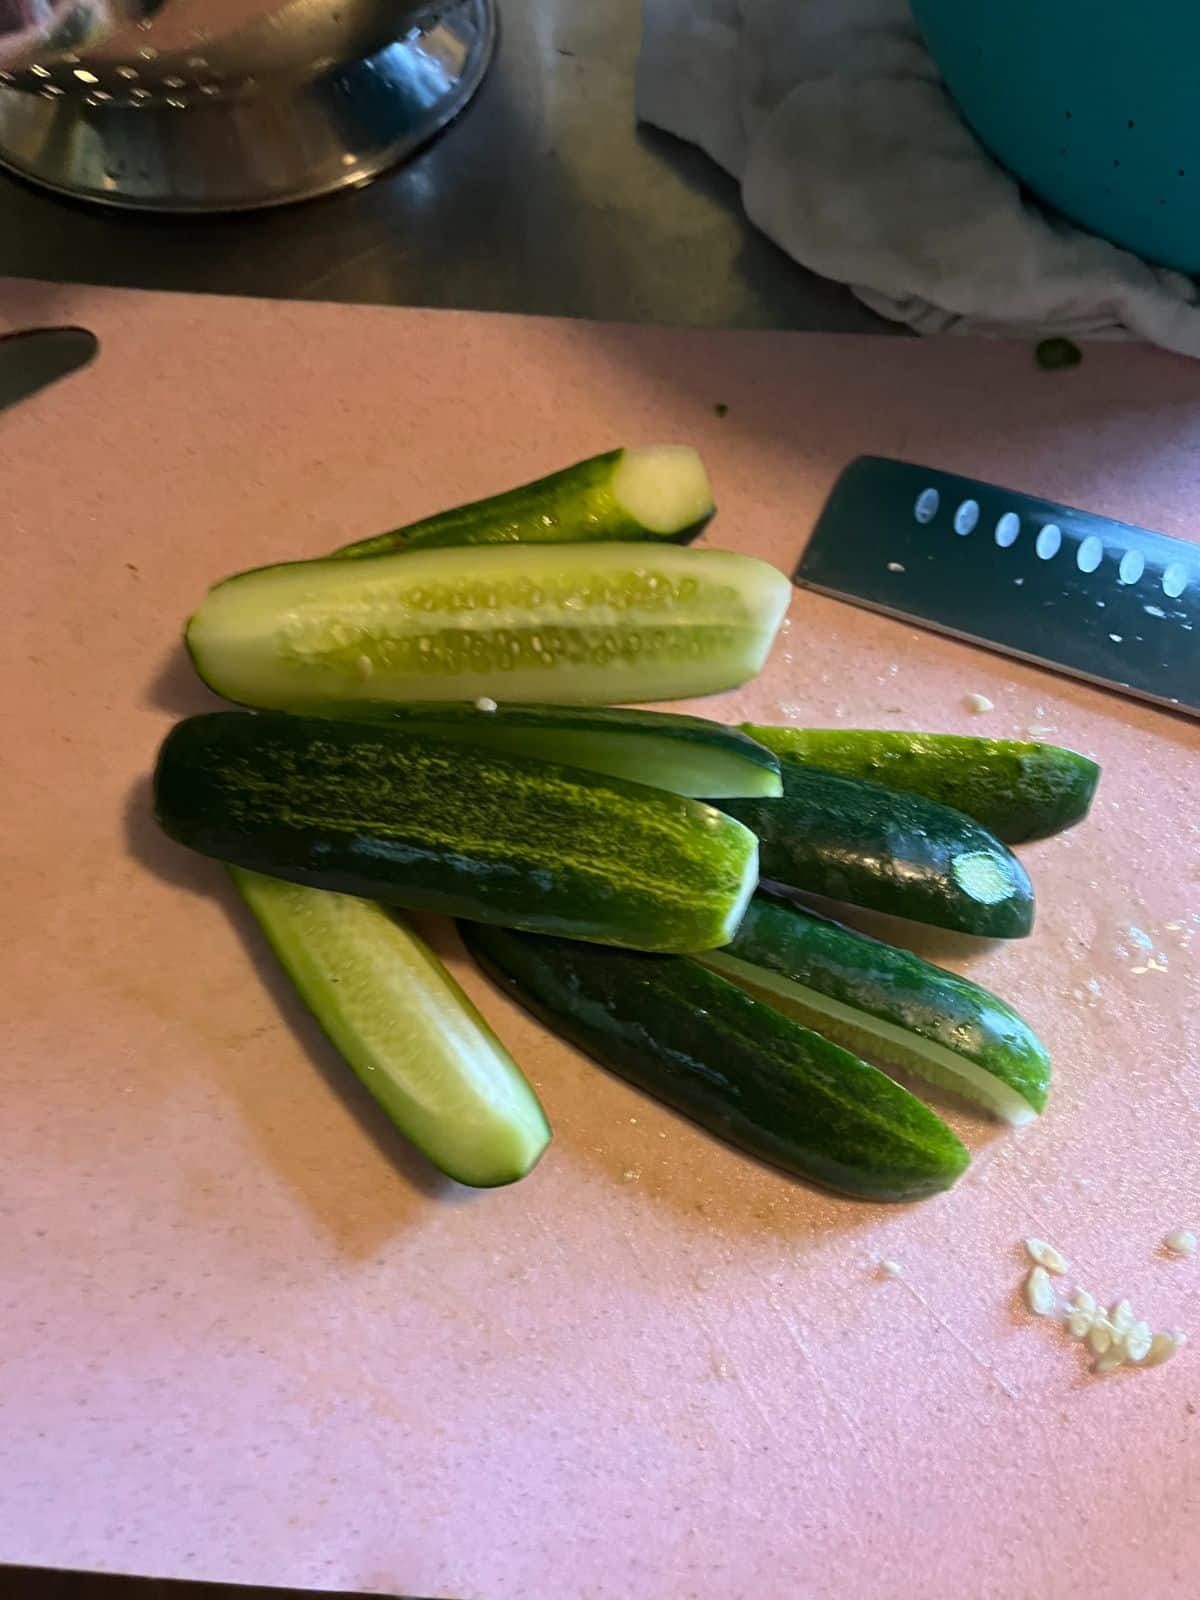 Cucumbers cut up for refrigerator pickles